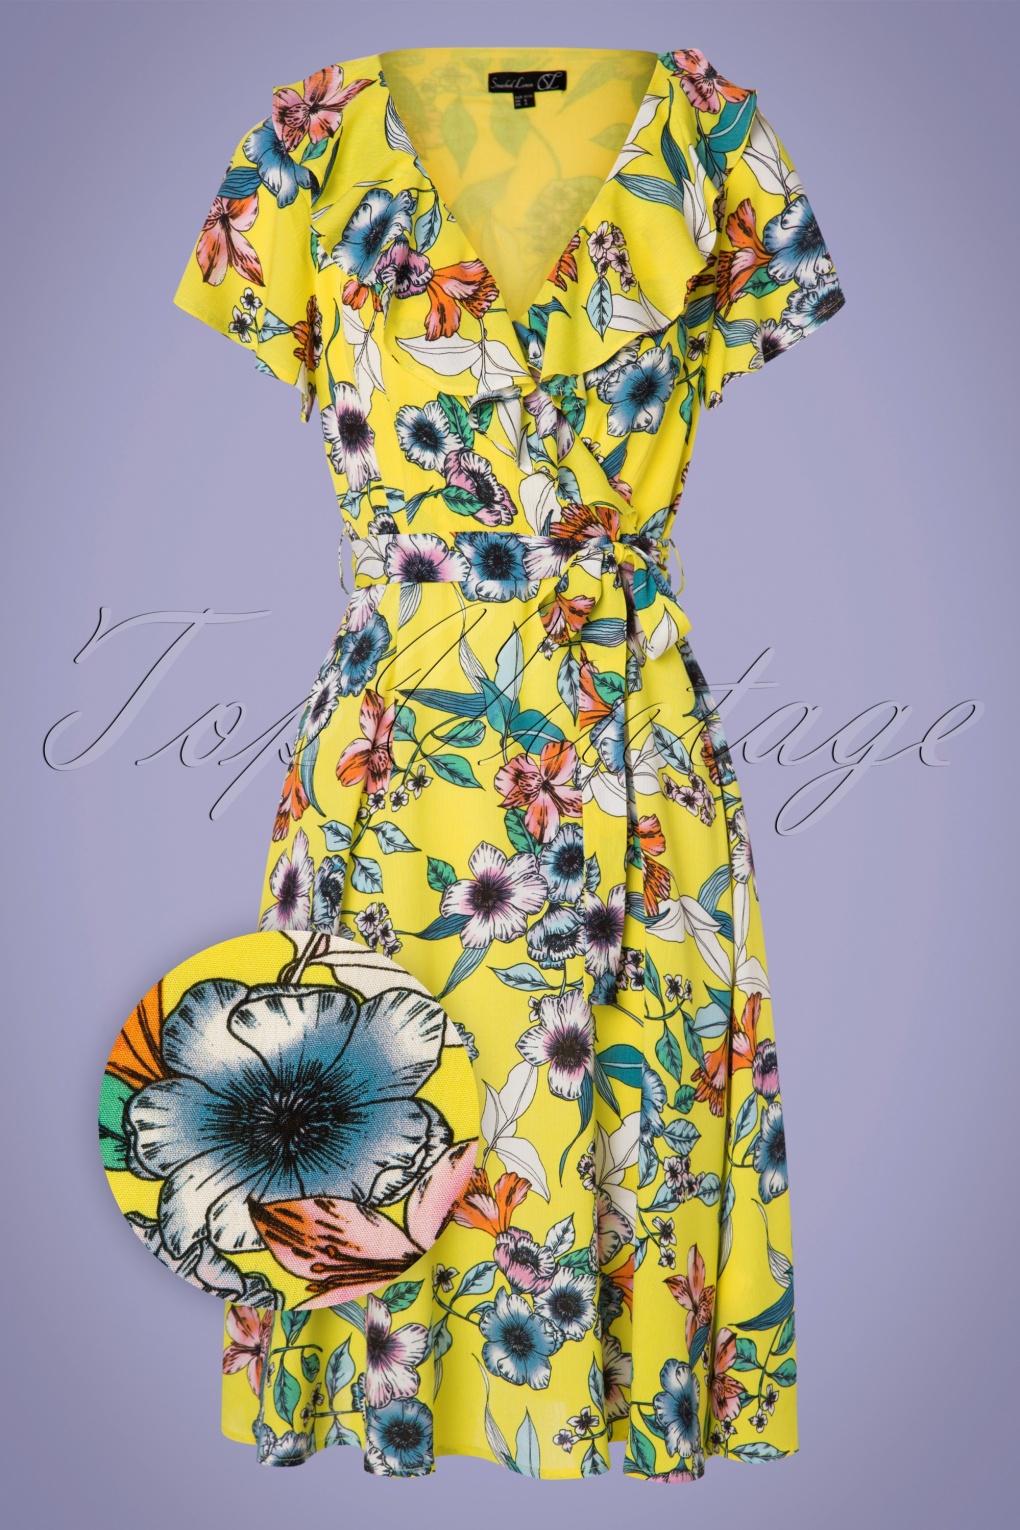 yellow floral swing dress